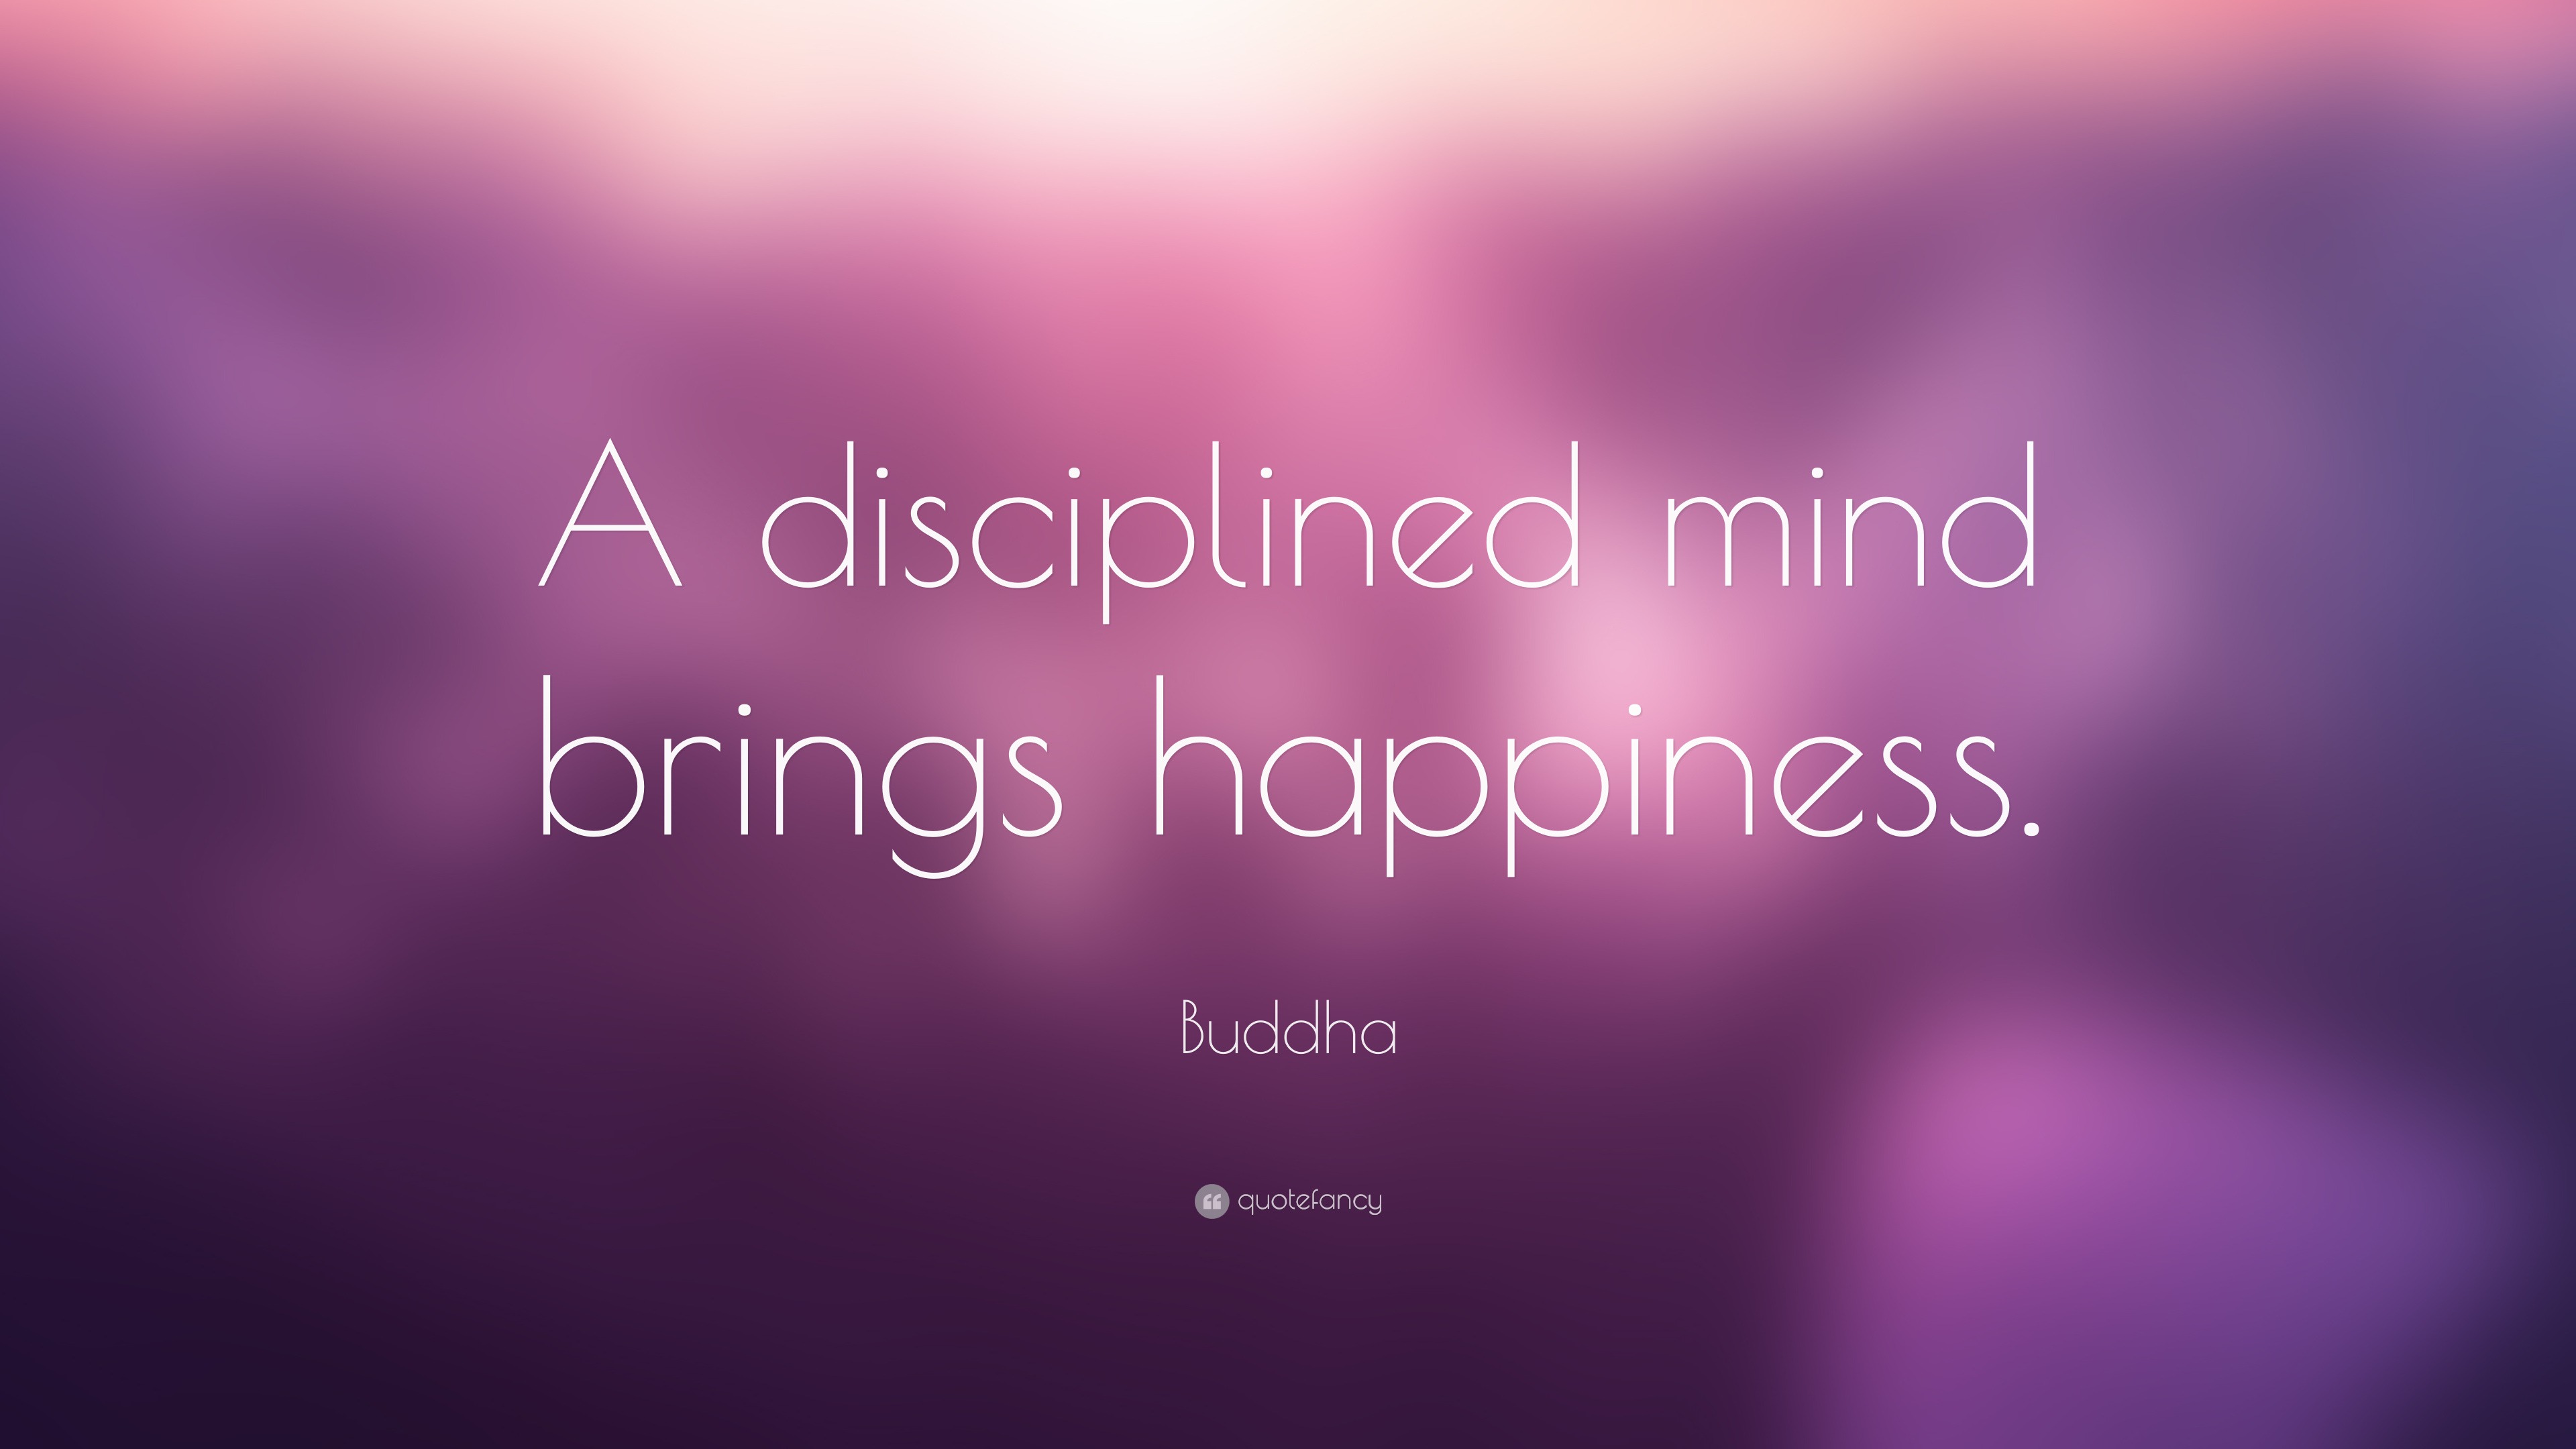 Buddha Quote: “A disciplined mind brings happiness.”